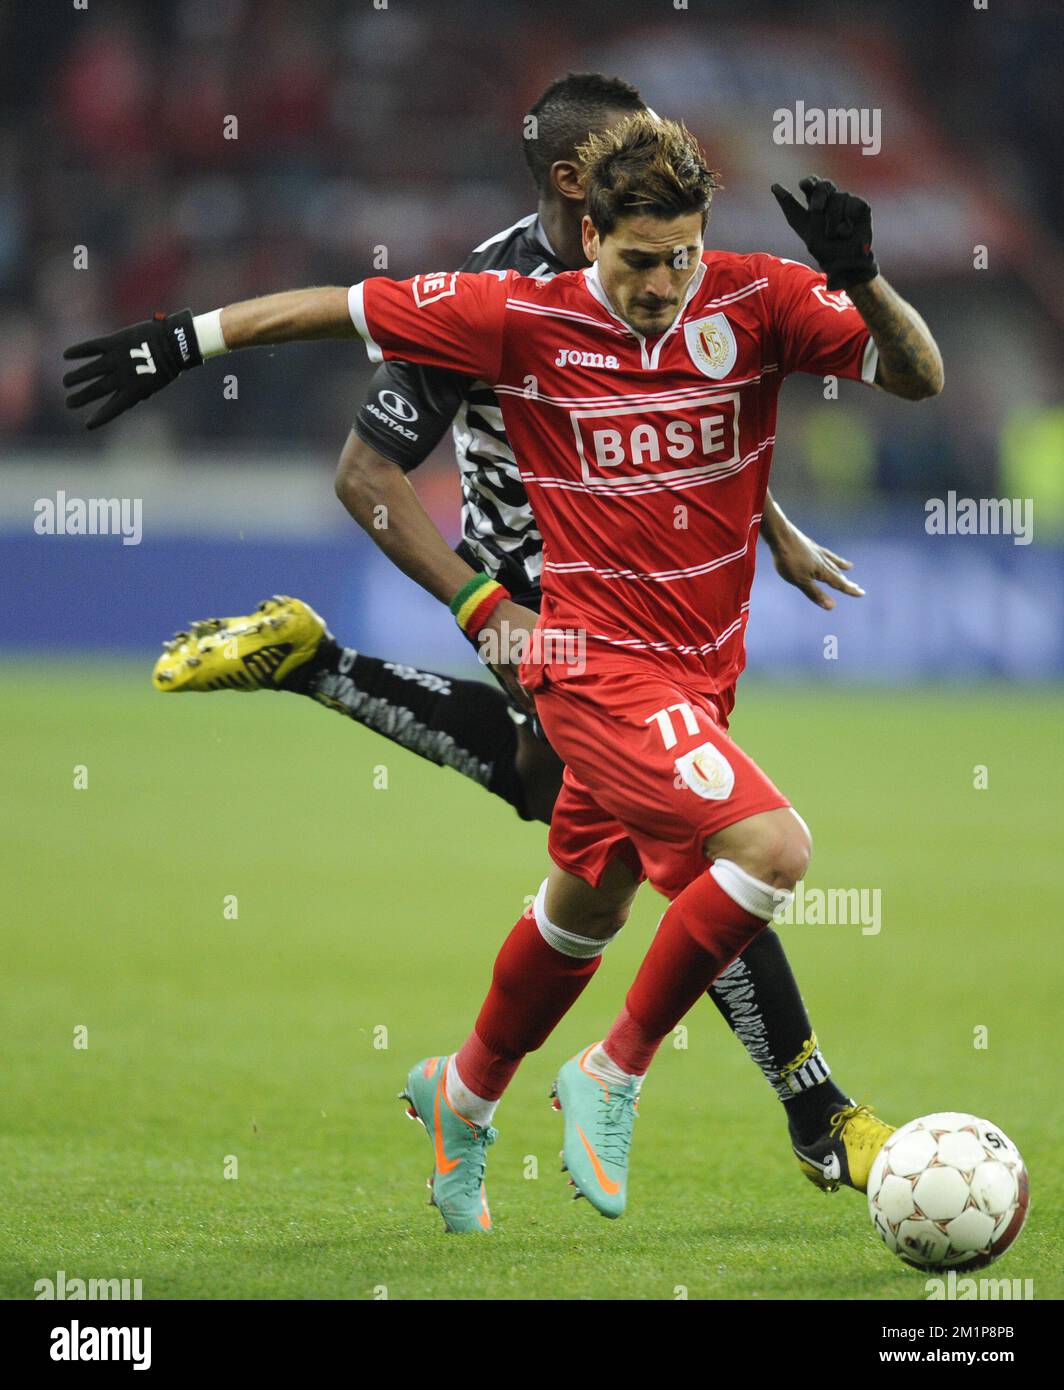 20121207 - LIEGE, BELGIUM: Standard's Maor Bar Buzaglo in action during the Jupiler Pro League match between Standard and Charleroi, in Liege, Friday 07 December 2012, on day 19 of the Belgian soccer championship. BELGA PHOTO JOHN THYS Stock Photo